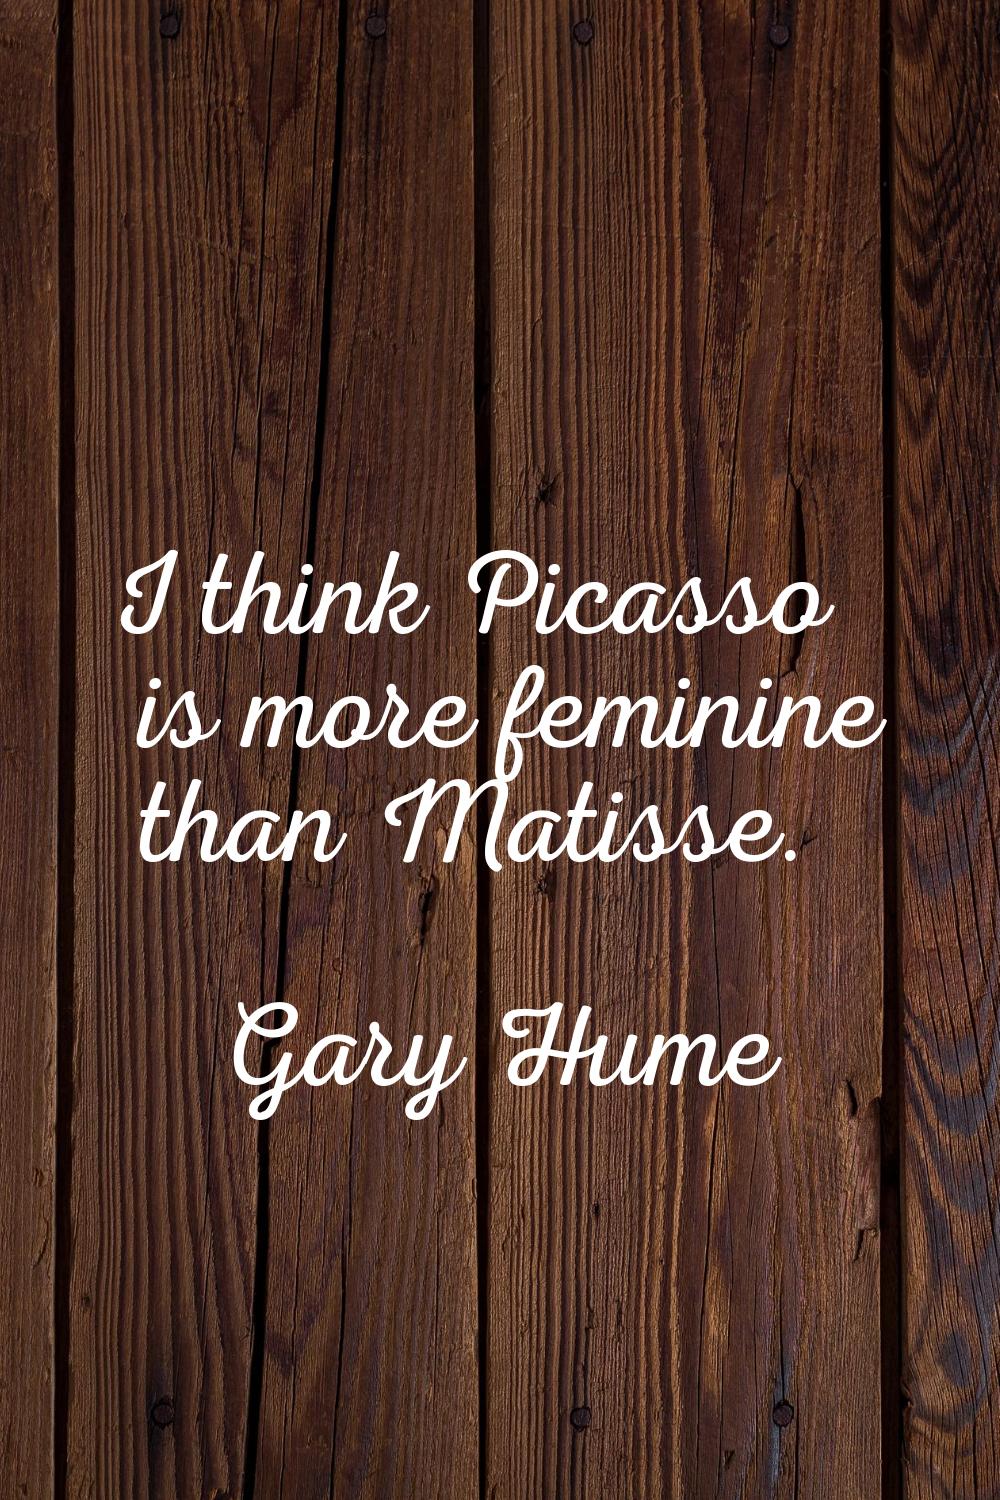 I think Picasso is more feminine than Matisse.